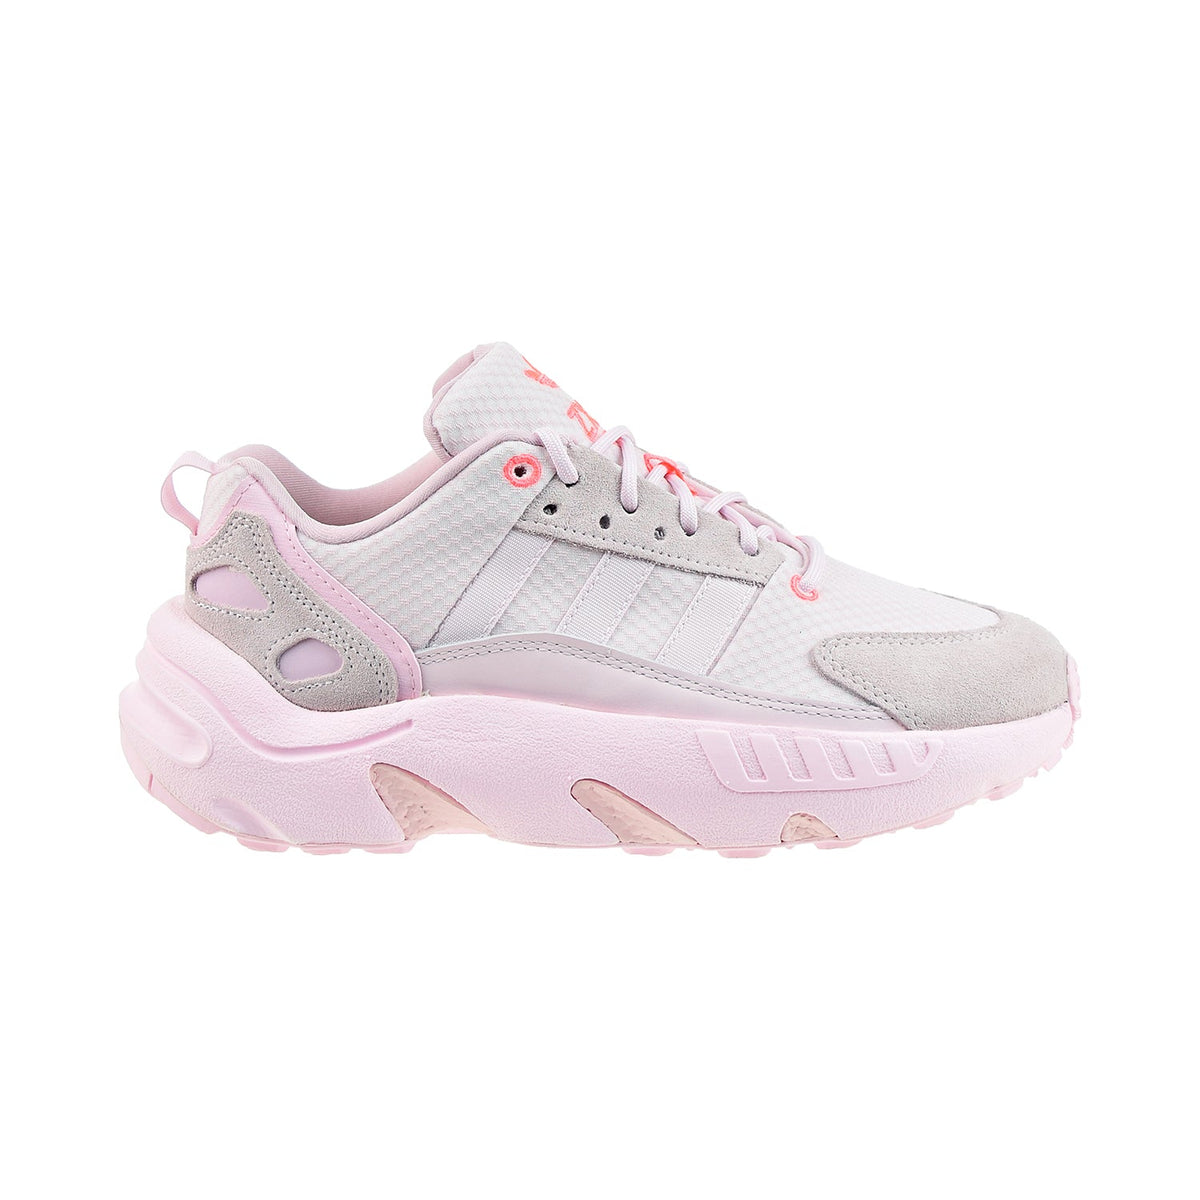 Adidas ZX 22 Boost Women's Shoes Almost Pink-Clear Pink-Acid 